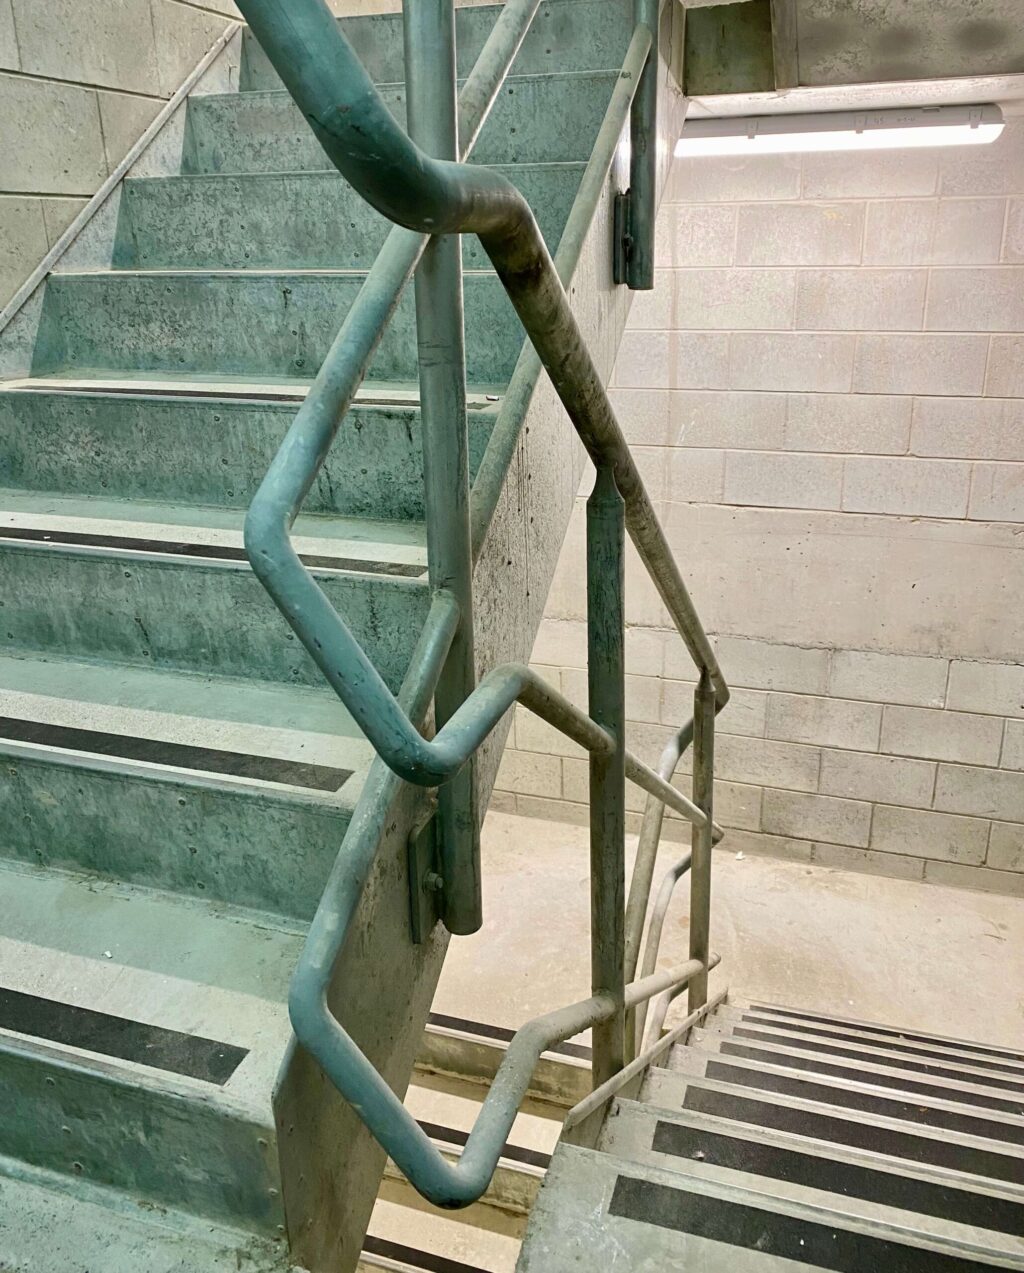 Building stairs are perfect for a workout